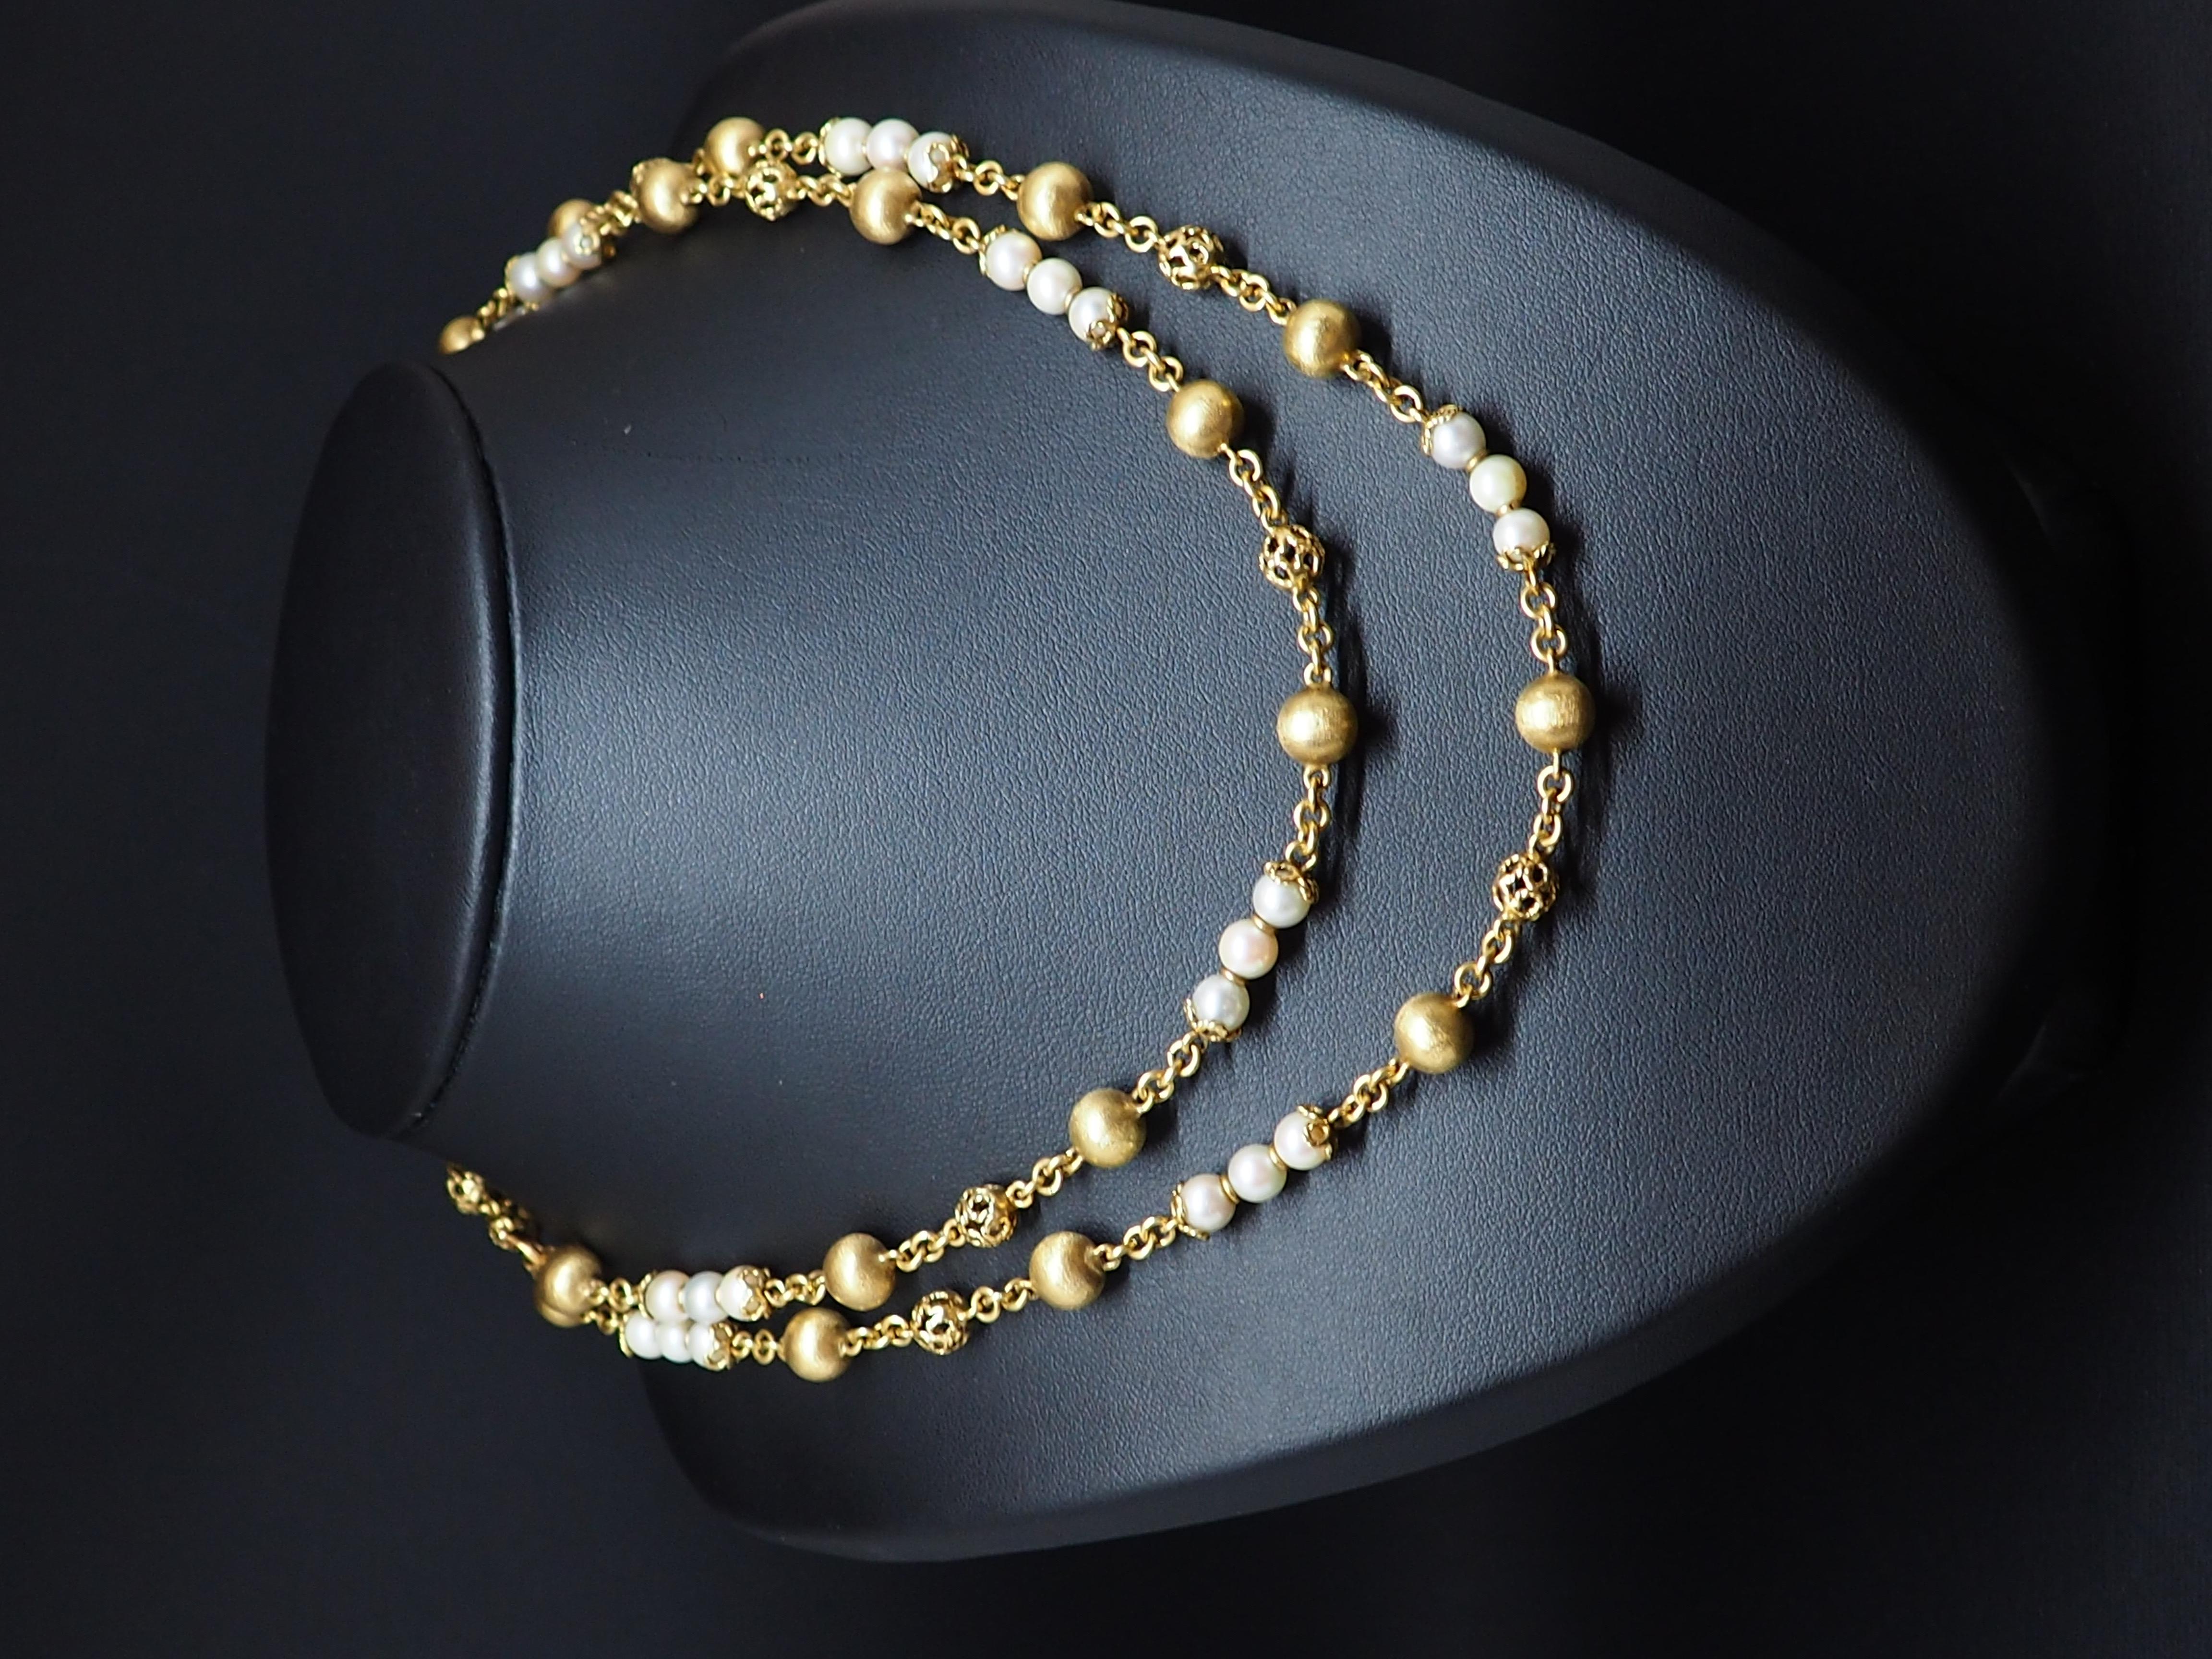 Experience Unparalleled Elegance with this Exquisite 18K Yellow Gold Beaded Necklace
This one-of-a-kind beaded necklace, masterfully crafted in sumptuous 18K yellow gold, represents the epitome of luxury and elegance. The necklace is generously